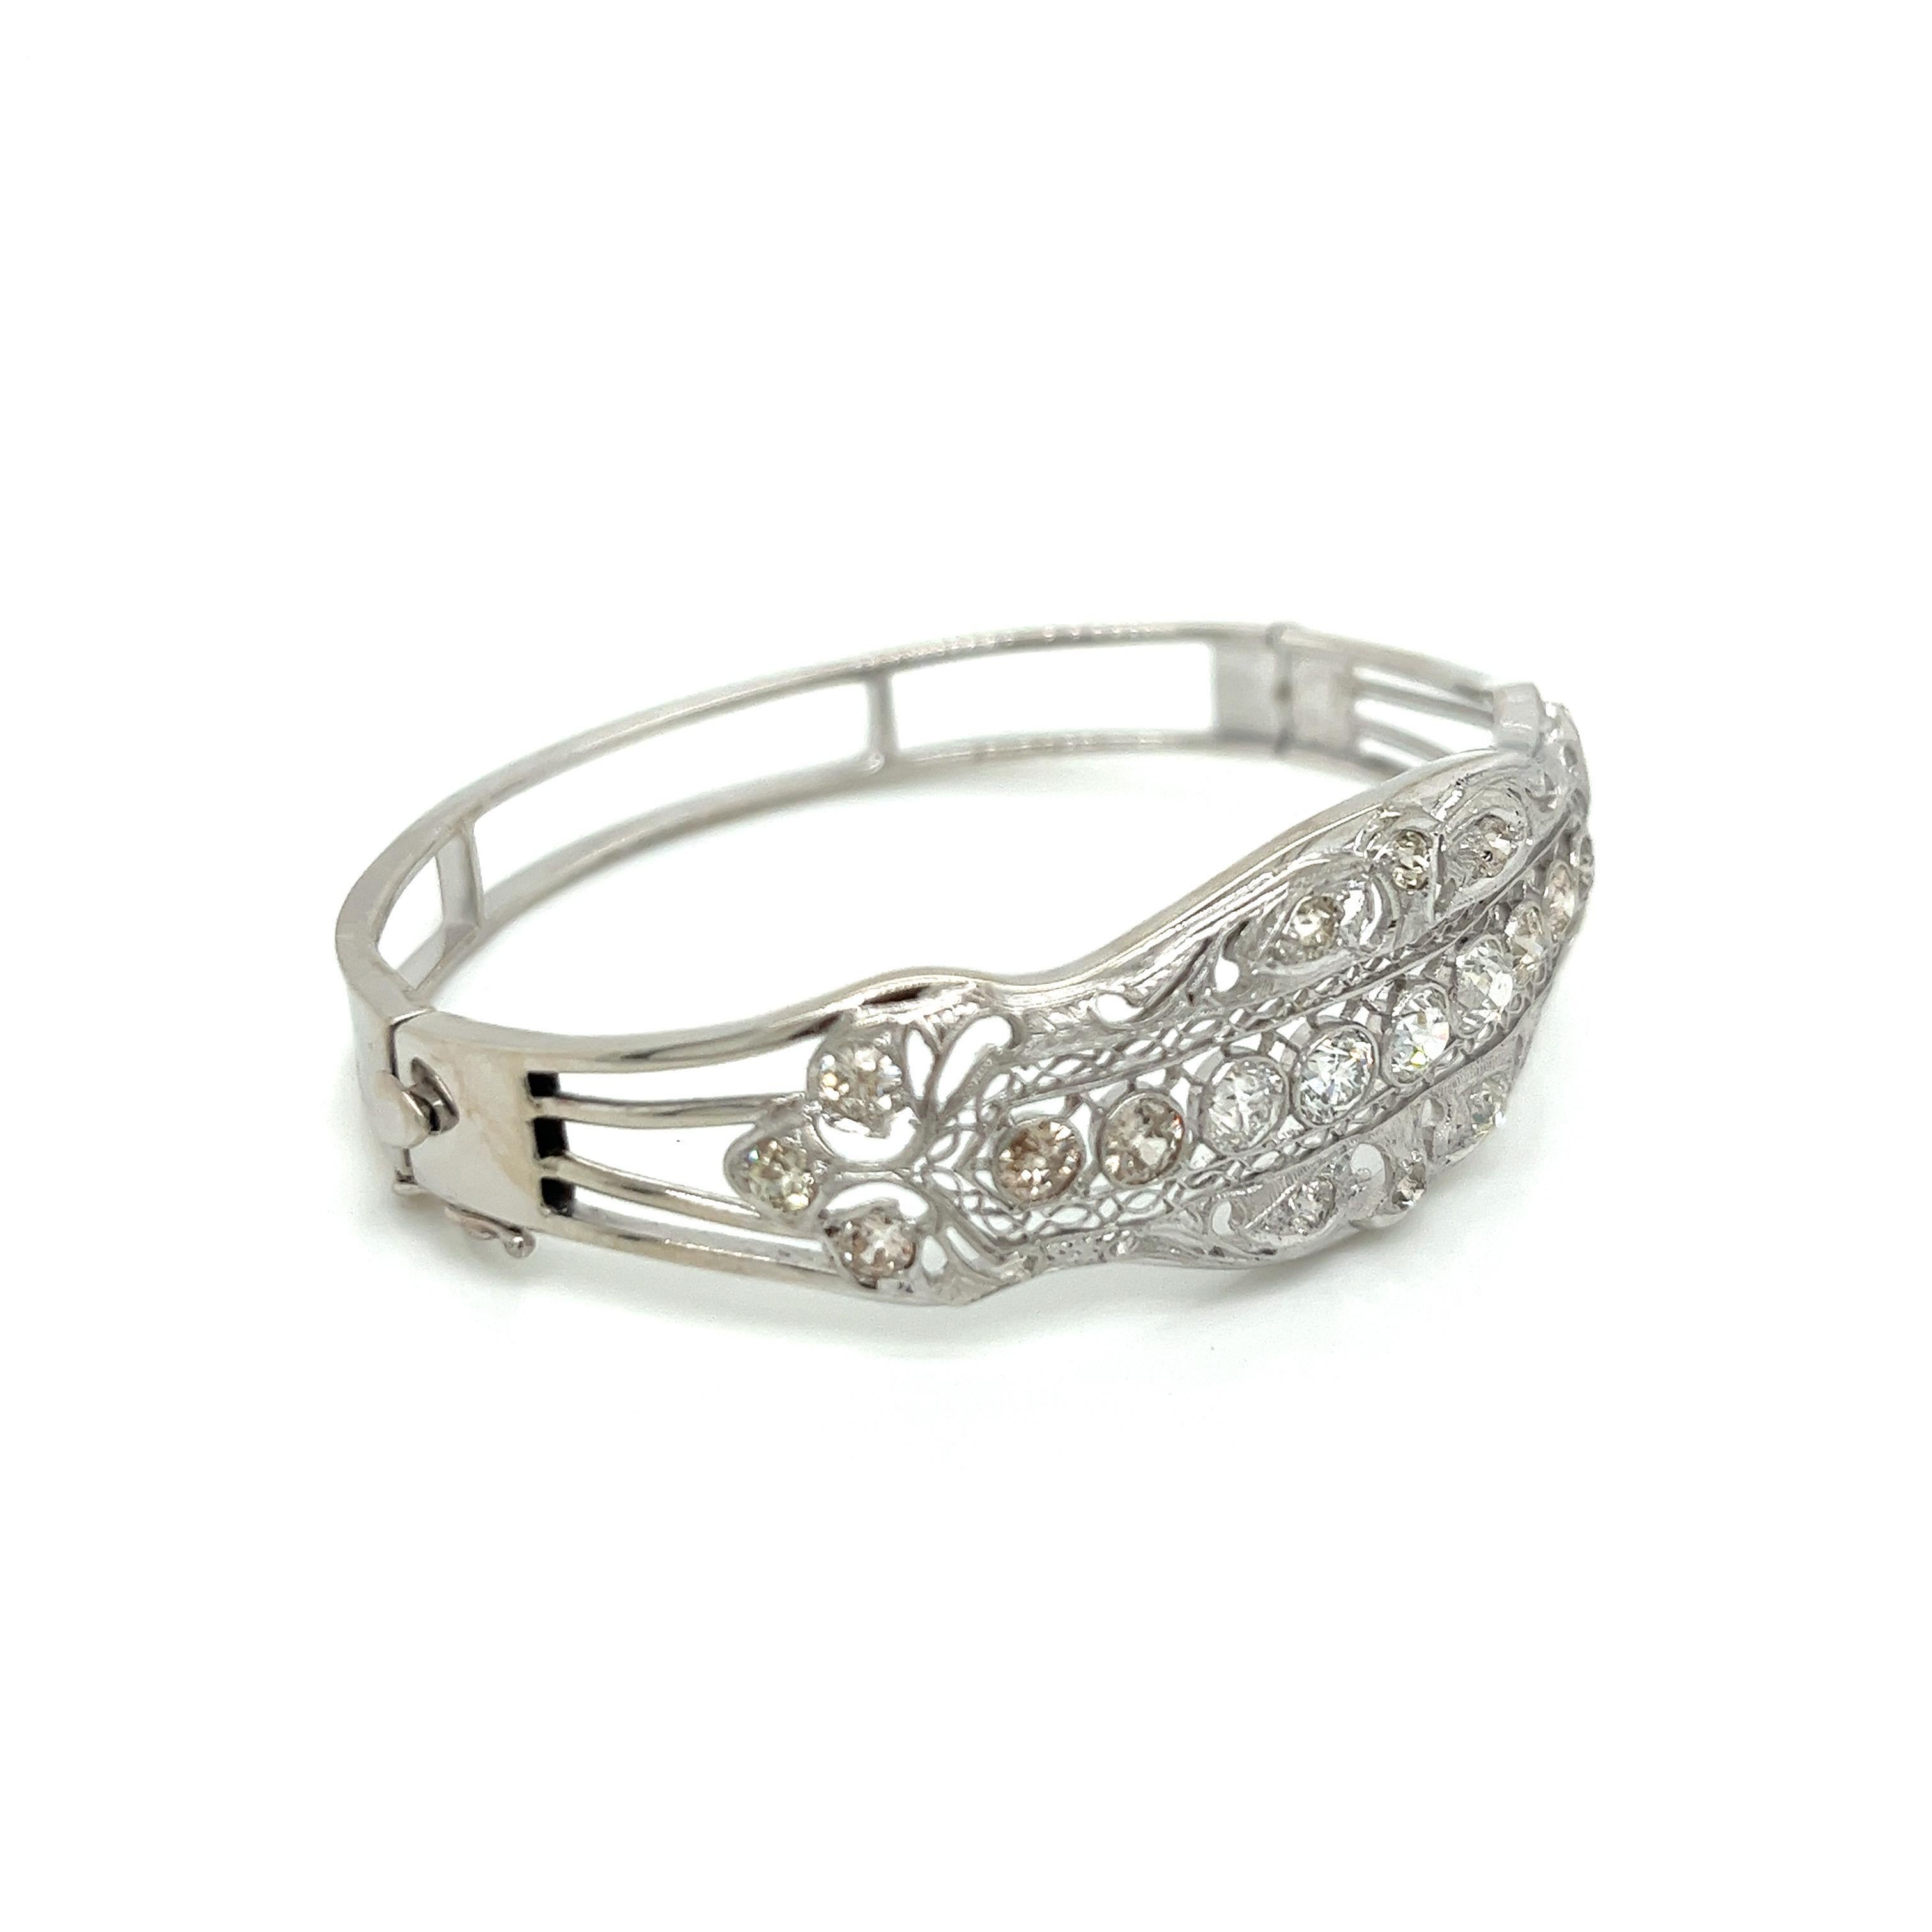 This is a magnificent vintage Edwardian platinum and 14k white gold diamond filigree bangle bracelet, a true testament to the exquisite craftsmanship of its era. The top section features an intricate platinum filigree design adorned with 21 stunning